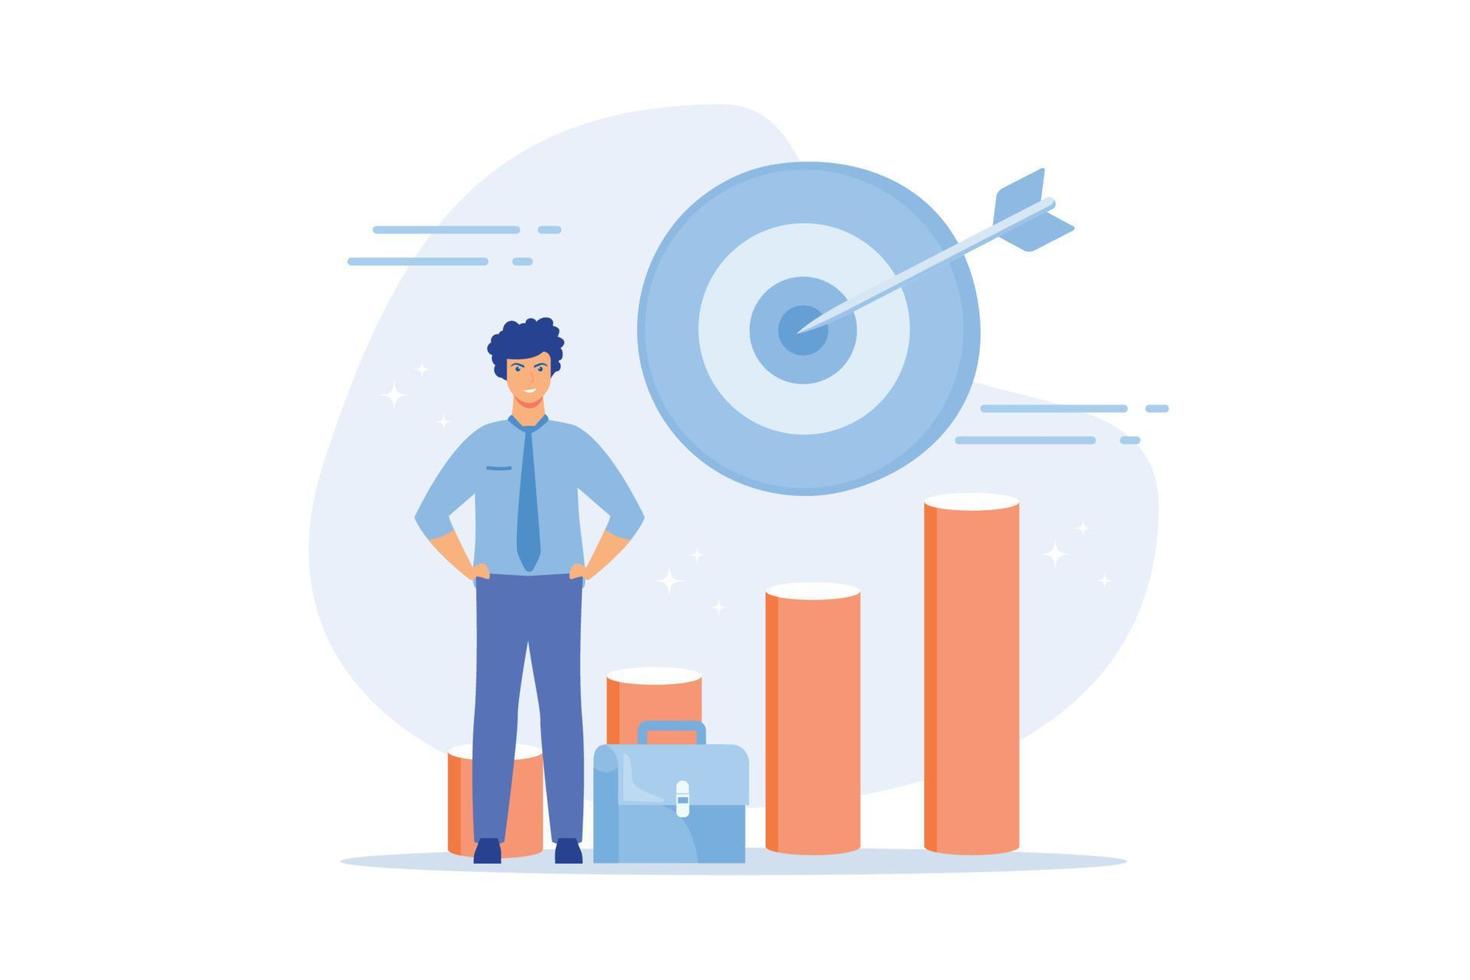 big businessman grows up in career, moving to the goal on the arrow, increases motivation, flat vector modern illustration